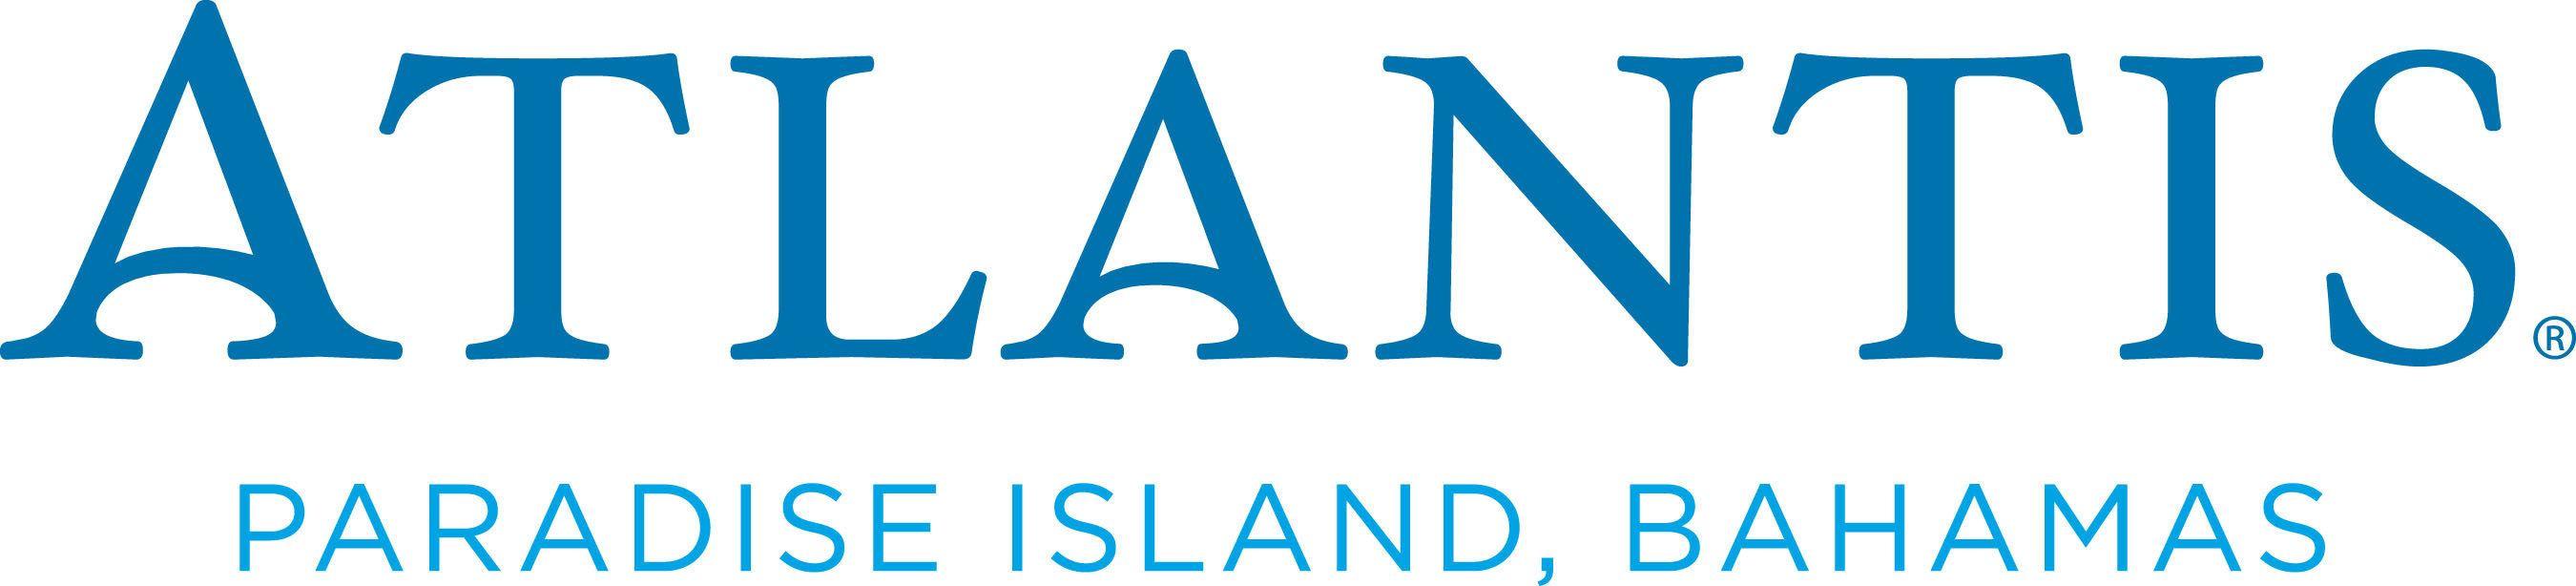 Atlantis Paradise Island Logo - Laughter In Paradise: Comedian Chelsea Handler To Perform At